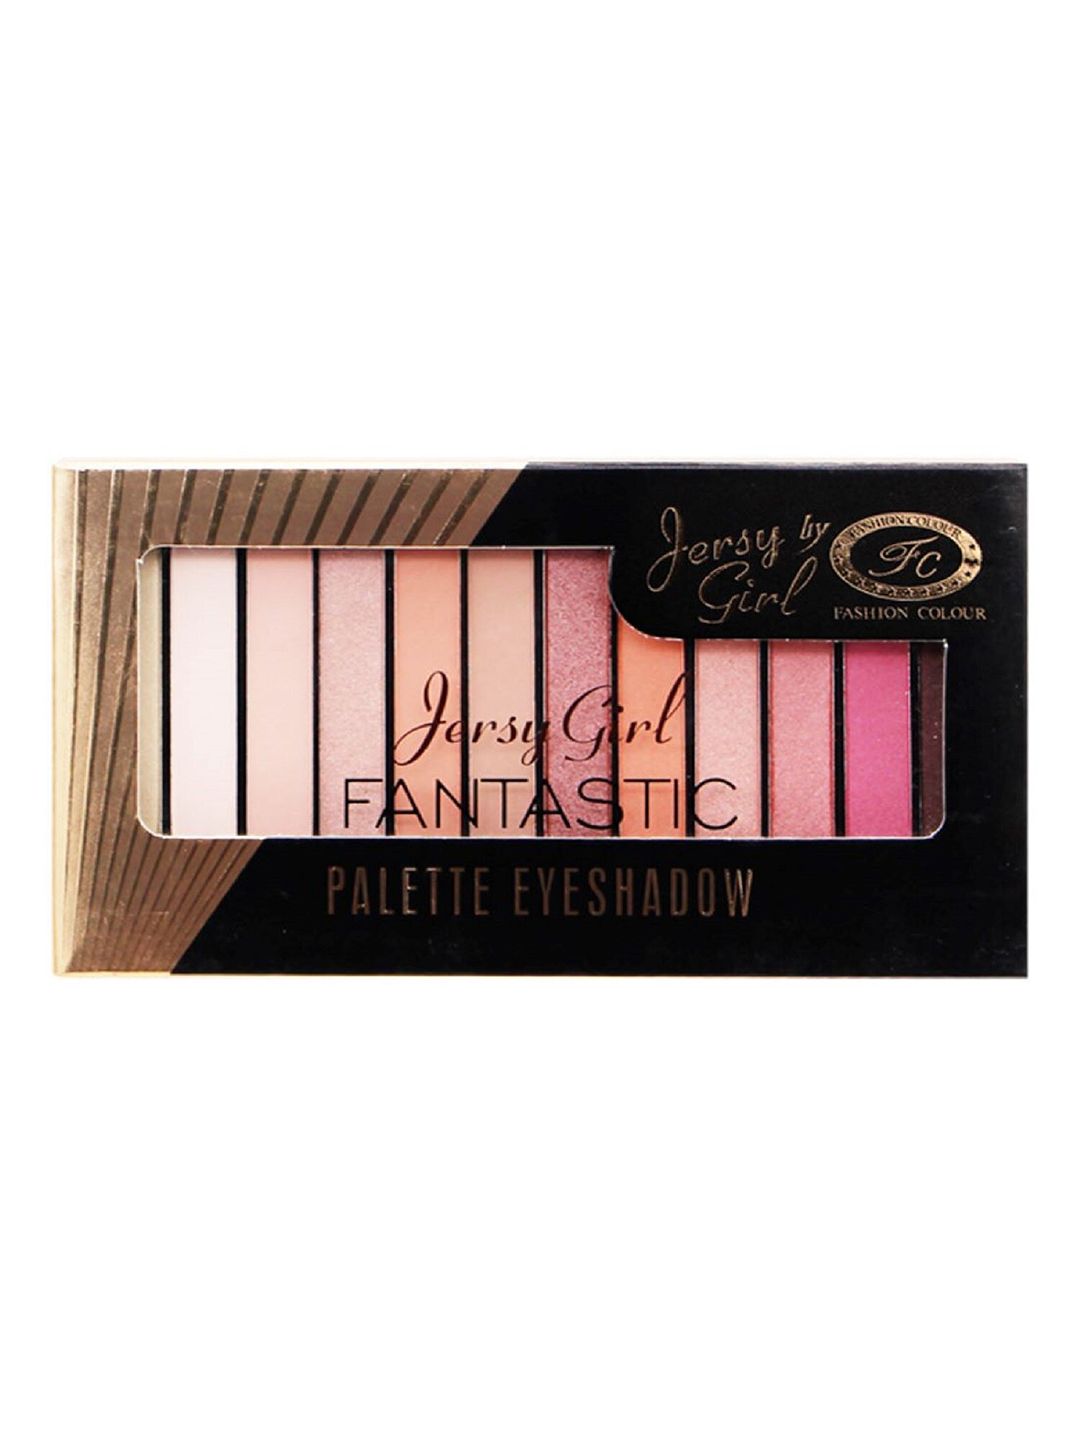 Fashion Colour Jersy Girl Fantastic Eyeshadow Palette - Shade 01 Price in India